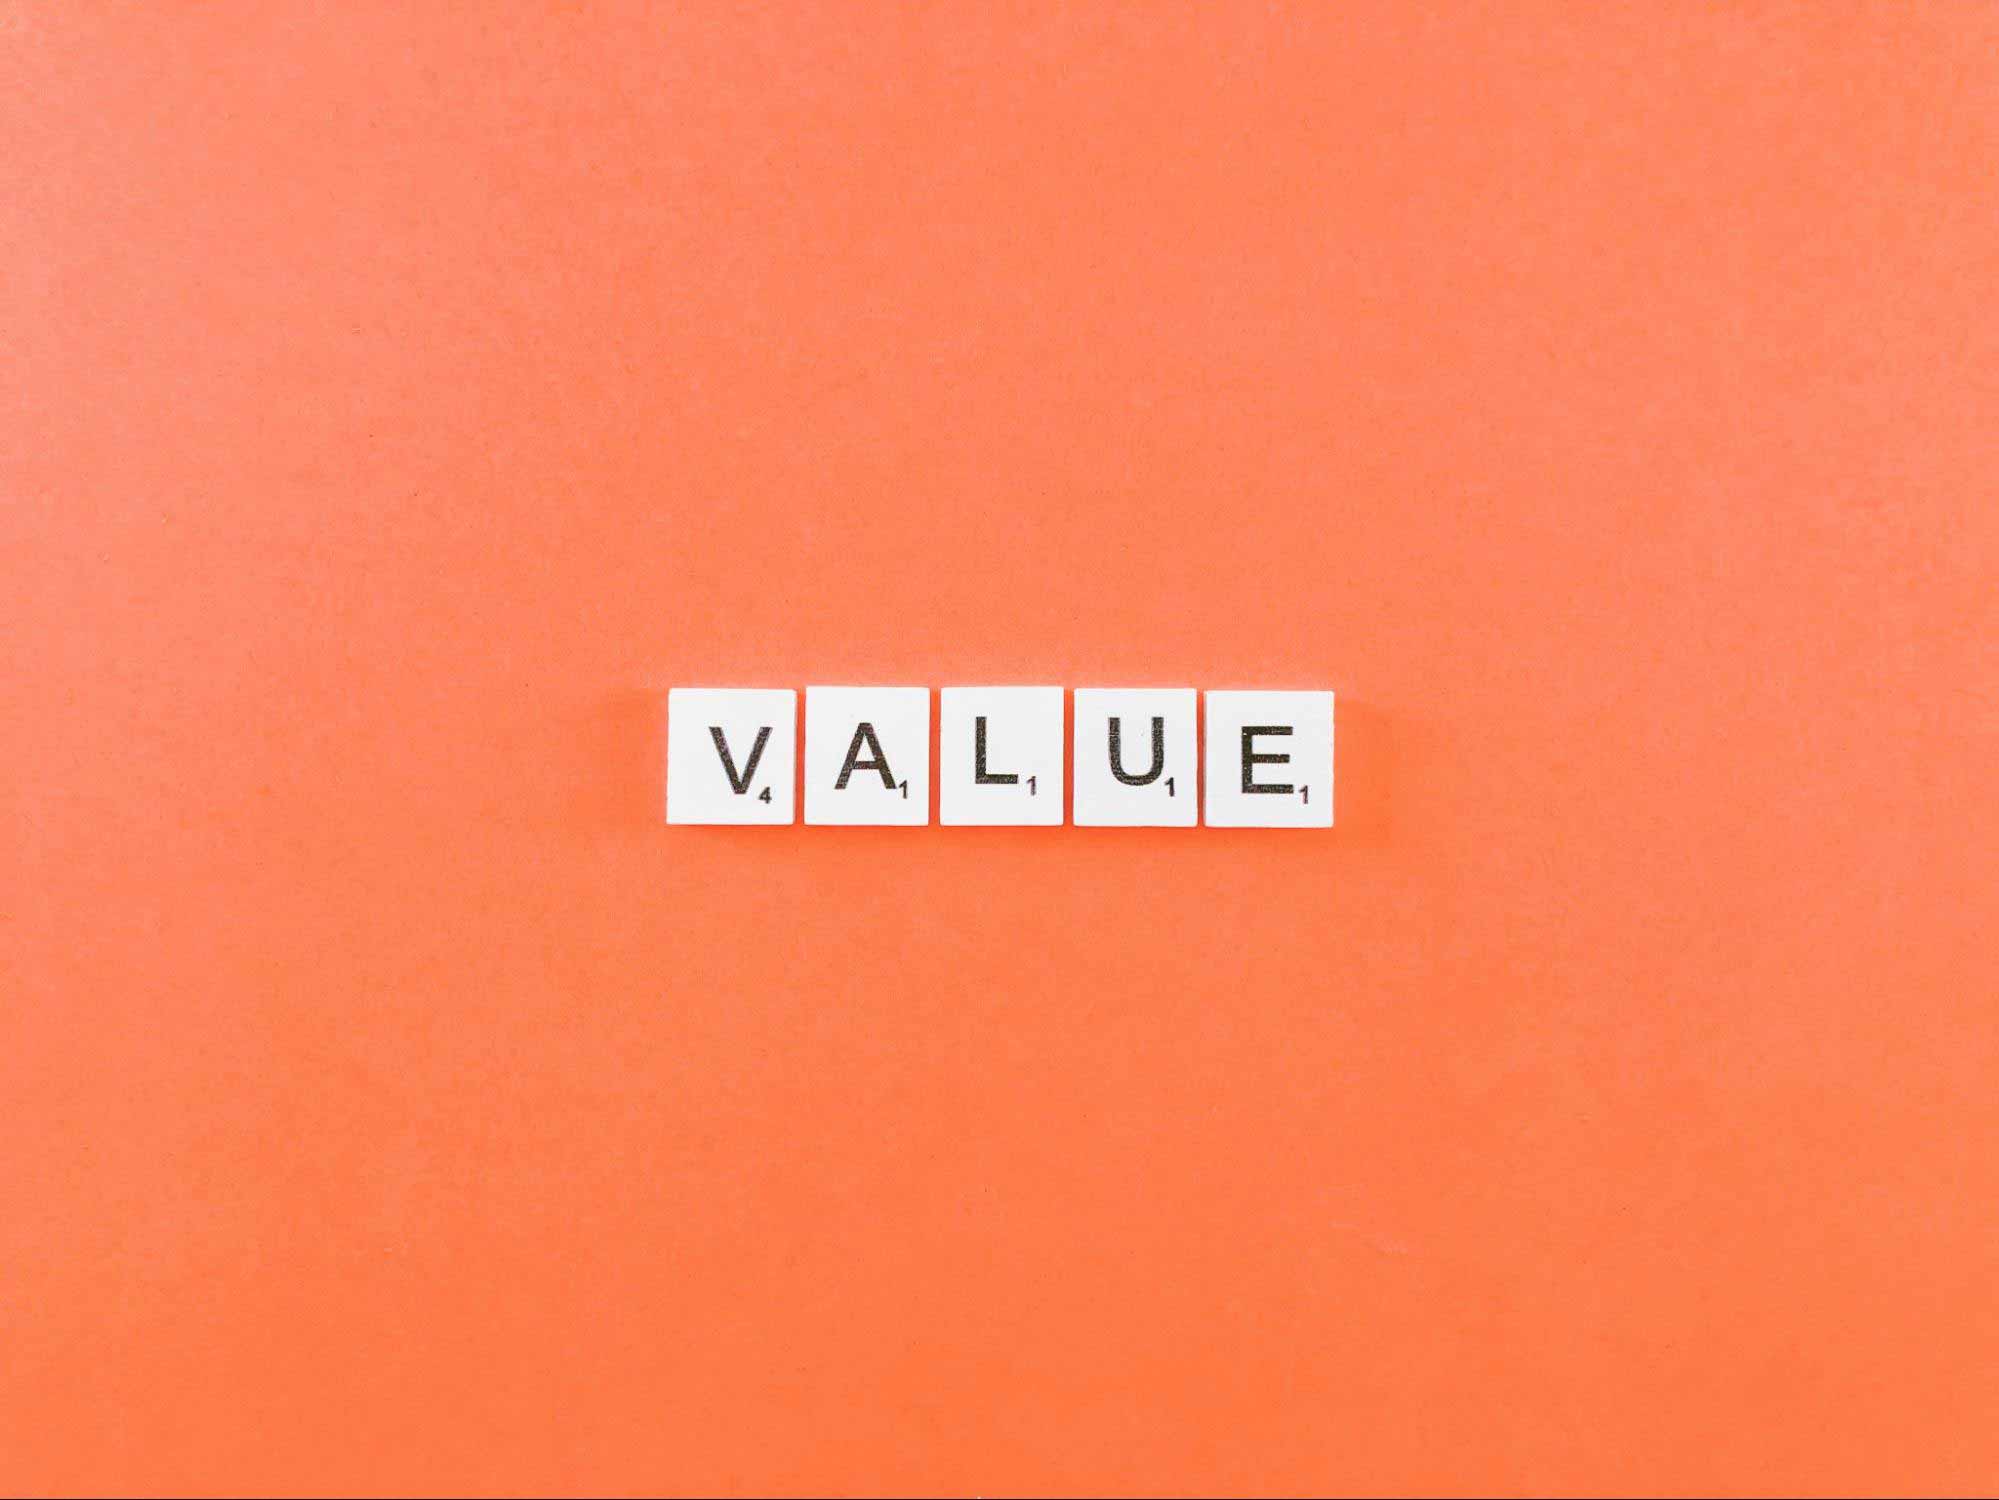 Valuable